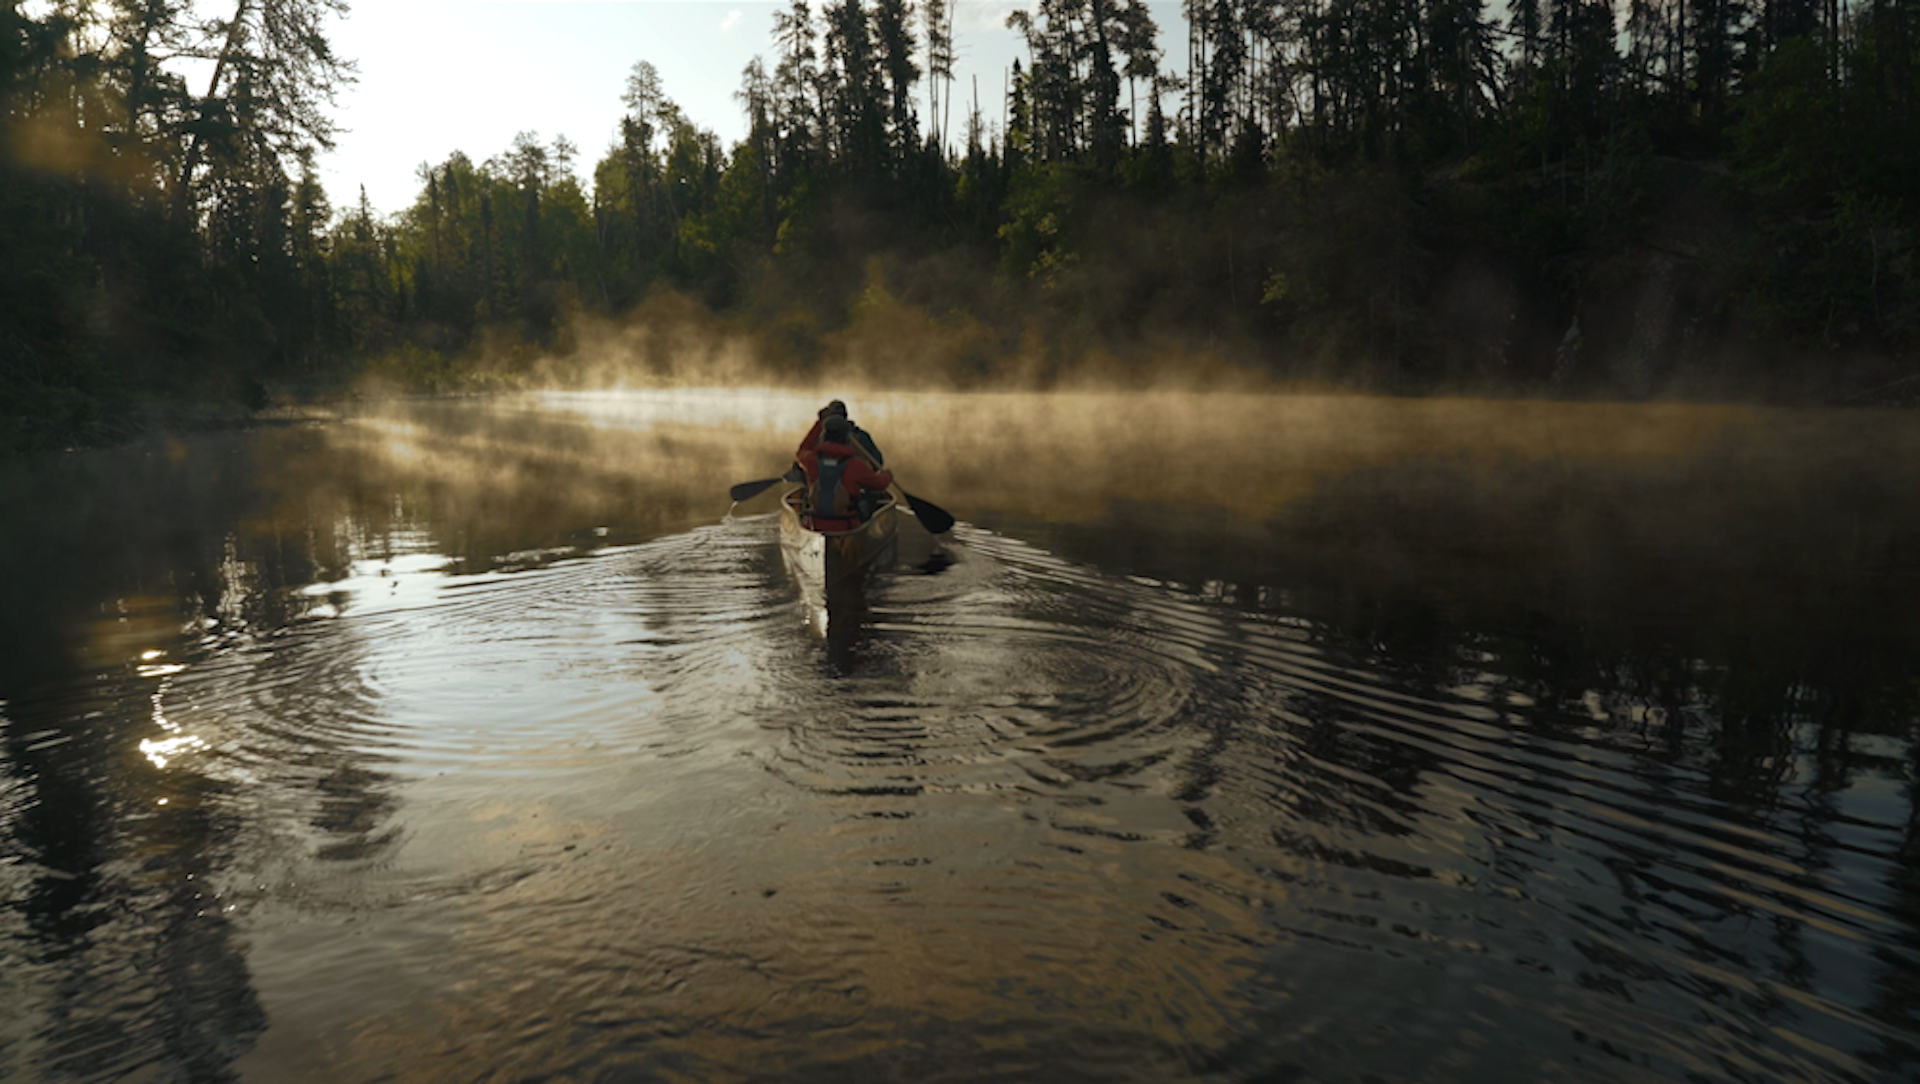 A person in a canoe in the middle of a river - a still from the film Public Trust